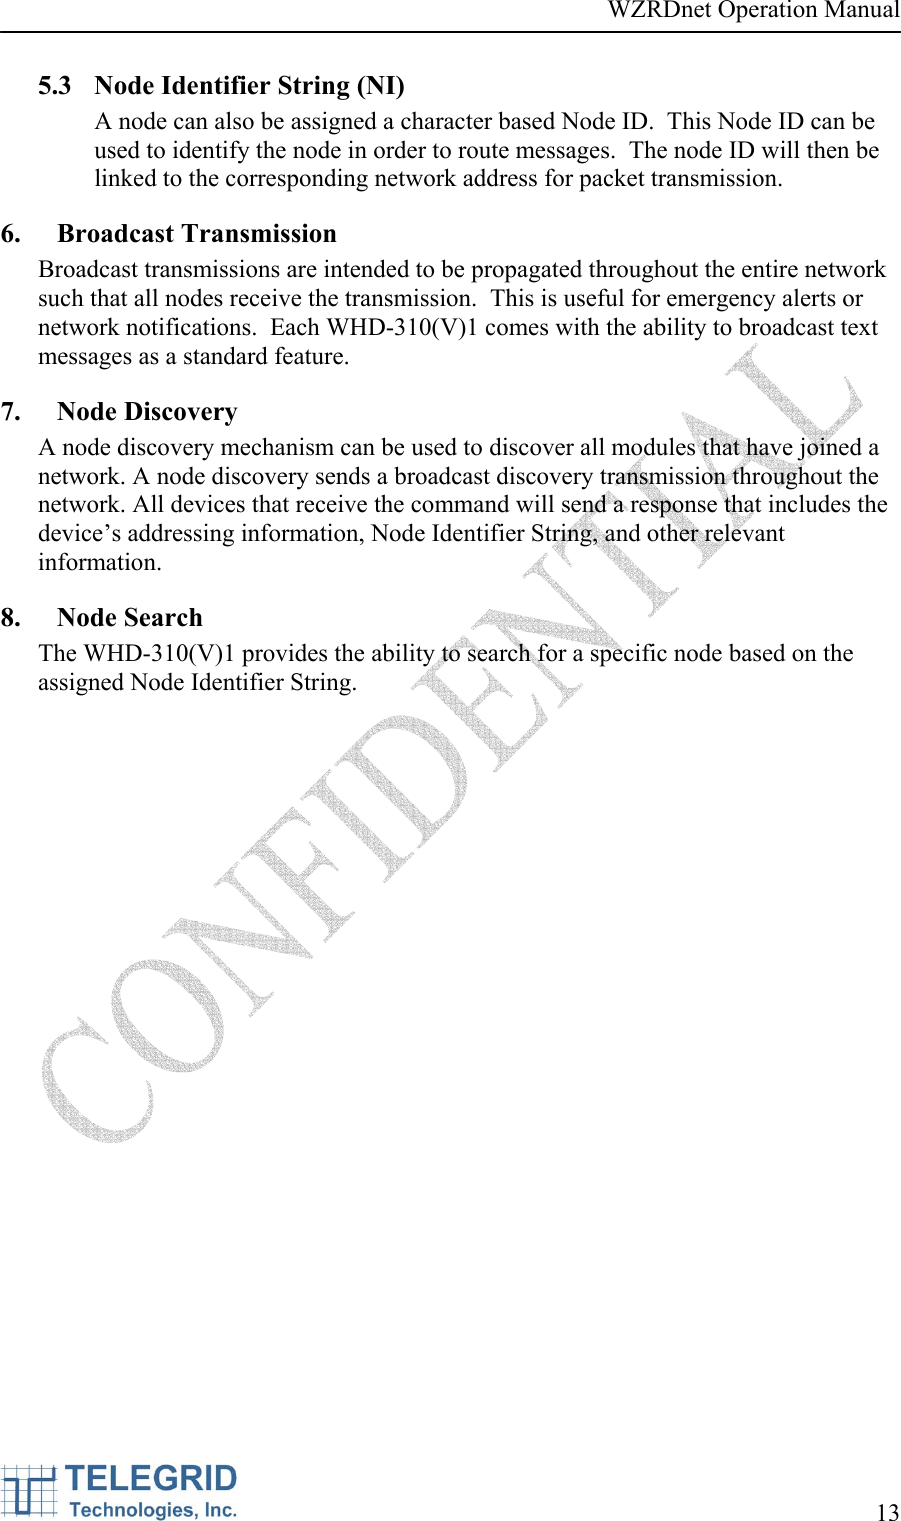 WZRDnet Operation Manual     13   5.3 Node Identifier String (NI) A node can also be assigned a character based Node ID.  This Node ID can be used to identify the node in order to route messages.  The node ID will then be linked to the corresponding network address for packet transmission. 6. Broadcast Transmission Broadcast transmissions are intended to be propagated throughout the entire network such that all nodes receive the transmission.  This is useful for emergency alerts or network notifications.  Each WHD-310(V)1 comes with the ability to broadcast text messages as a standard feature. 7. Node Discovery A node discovery mechanism can be used to discover all modules that have joined a network. A node discovery sends a broadcast discovery transmission throughout the network. All devices that receive the command will send a response that includes the device’s addressing information, Node Identifier String, and other relevant information.  8. Node Search The WHD-310(V)1 provides the ability to search for a specific node based on the assigned Node Identifier String. 